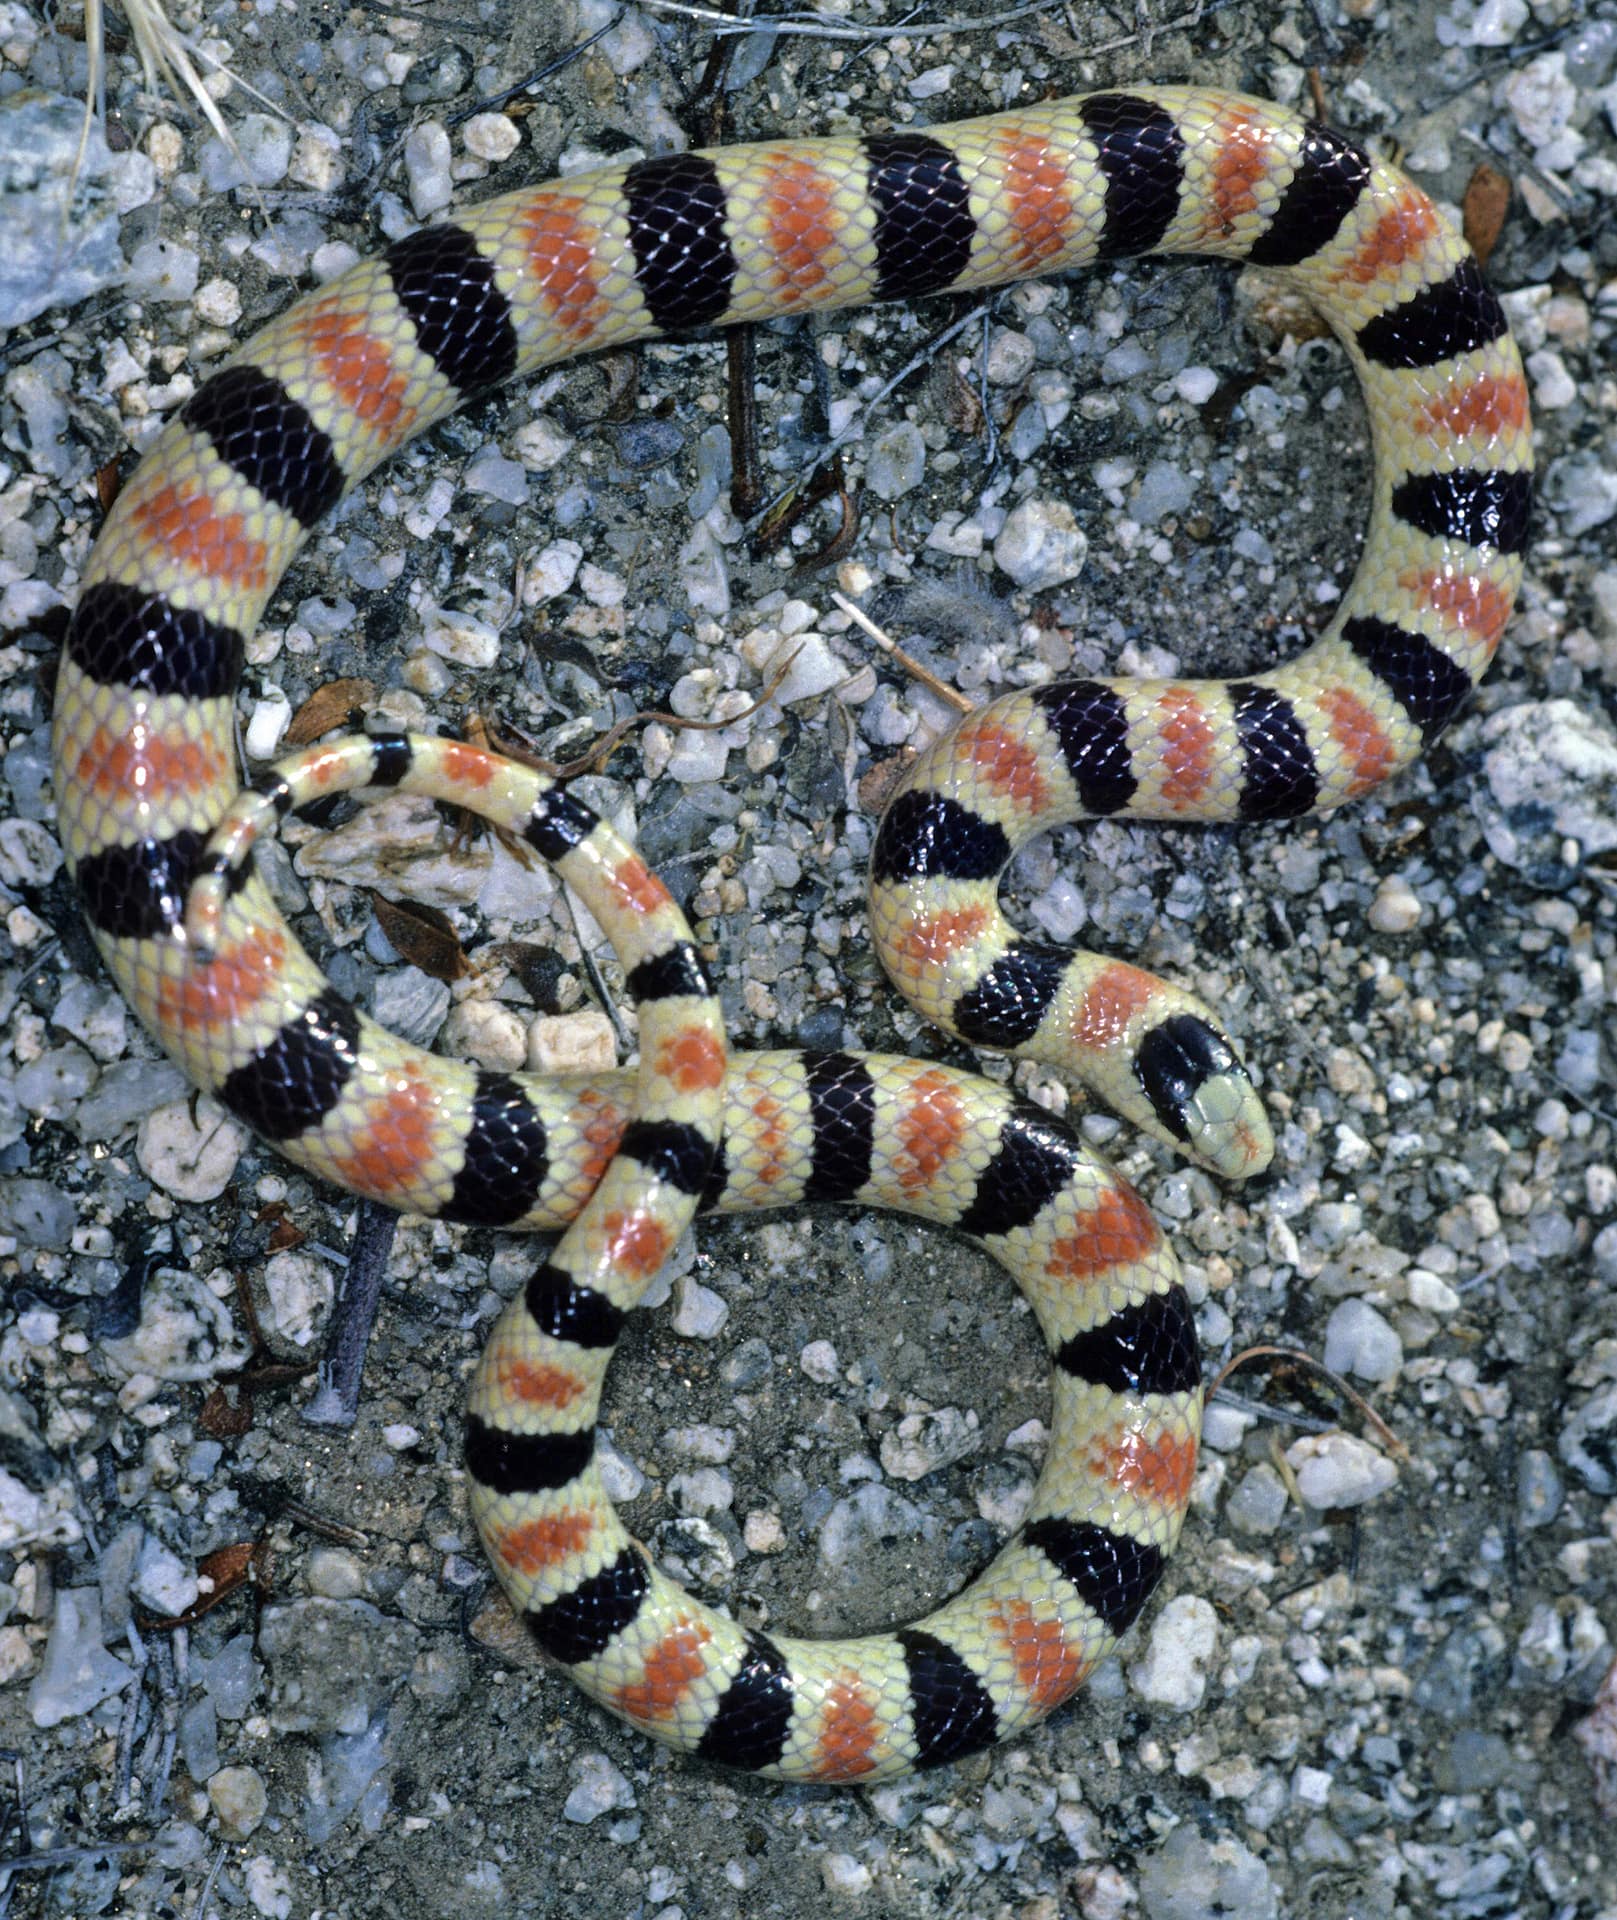 Shovel-nosed Snake, a sand-dwelling species from southern California